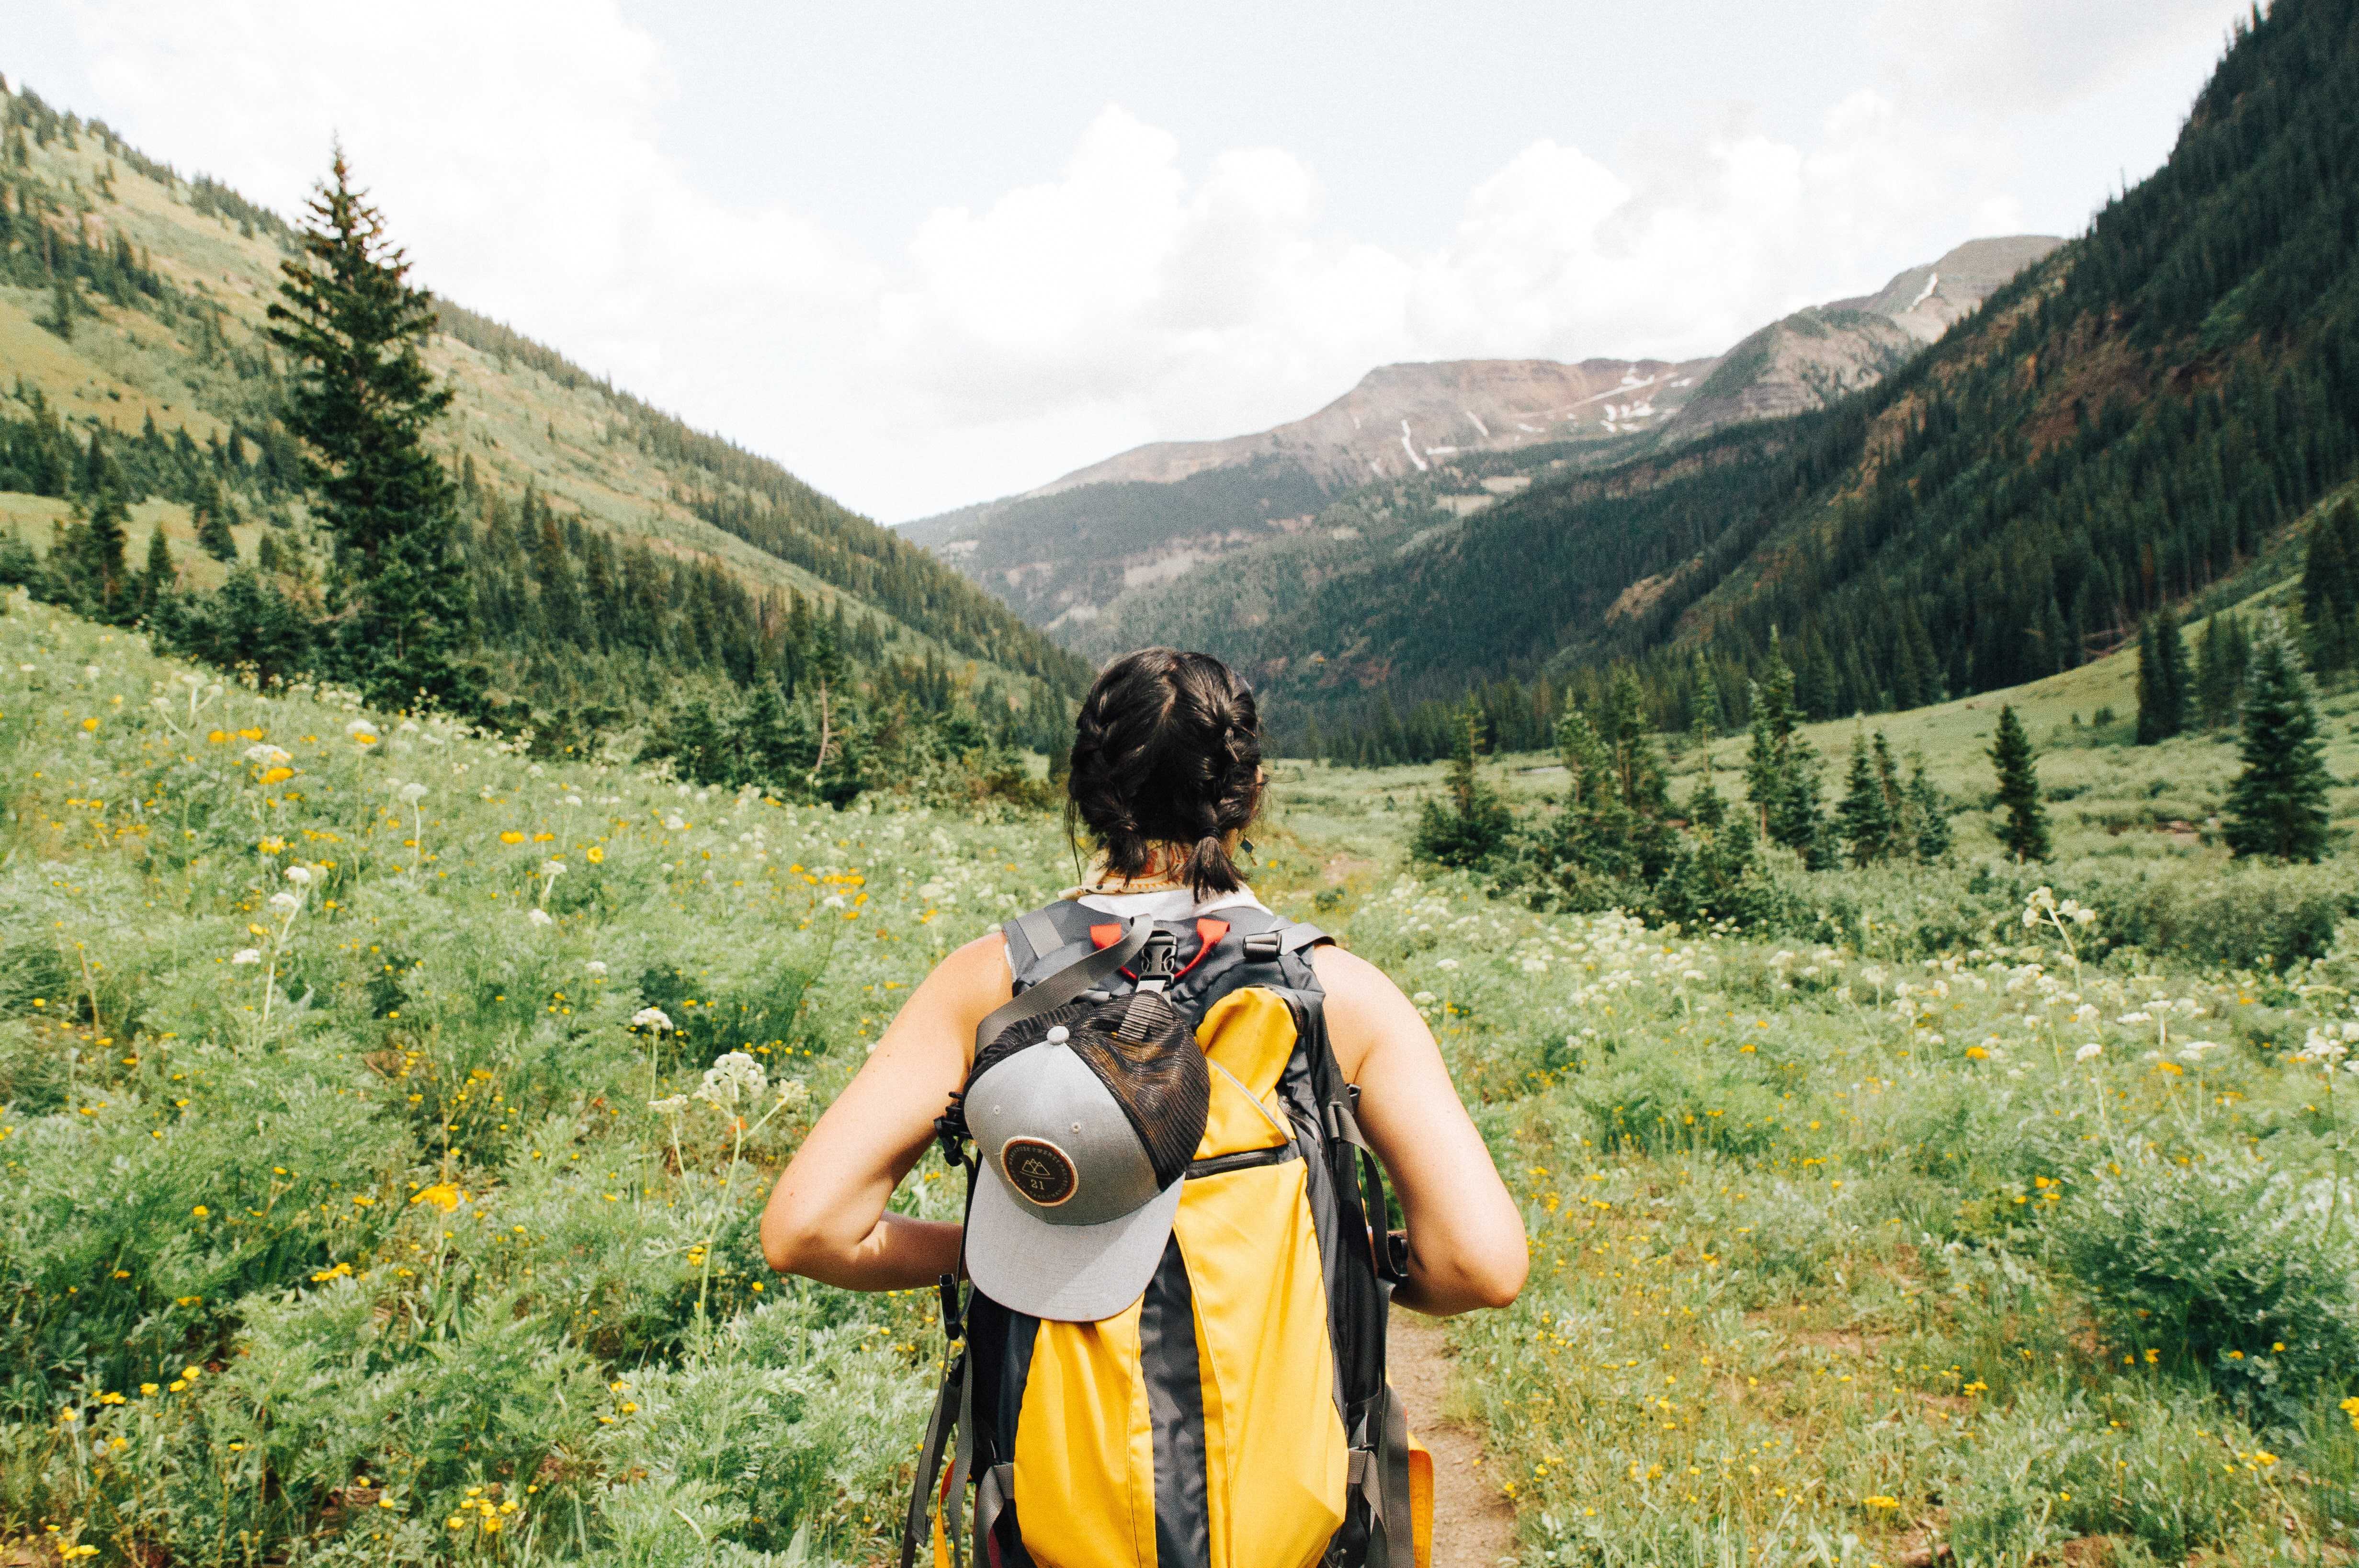 frugal living tips for outside activities. Picture of woman looking out at mountains while on a trail